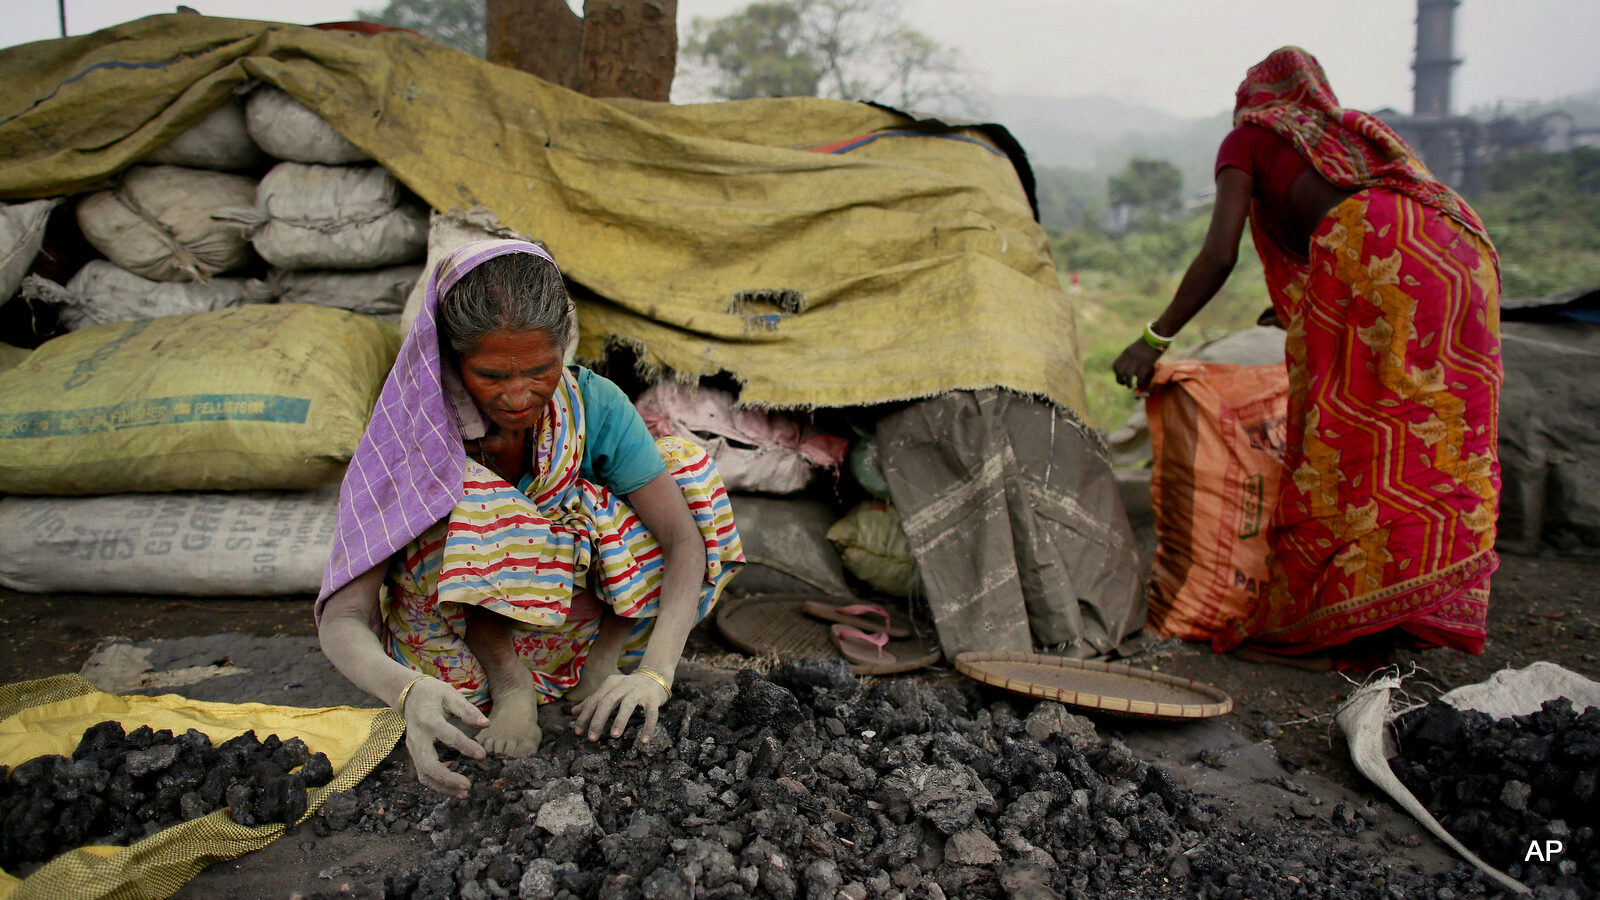 Indian women use bare hands to pick reusable pieces from heaps of used coal discarded by a carbon factory in Gauhati, India, Monday, Dec. 14, 2015.